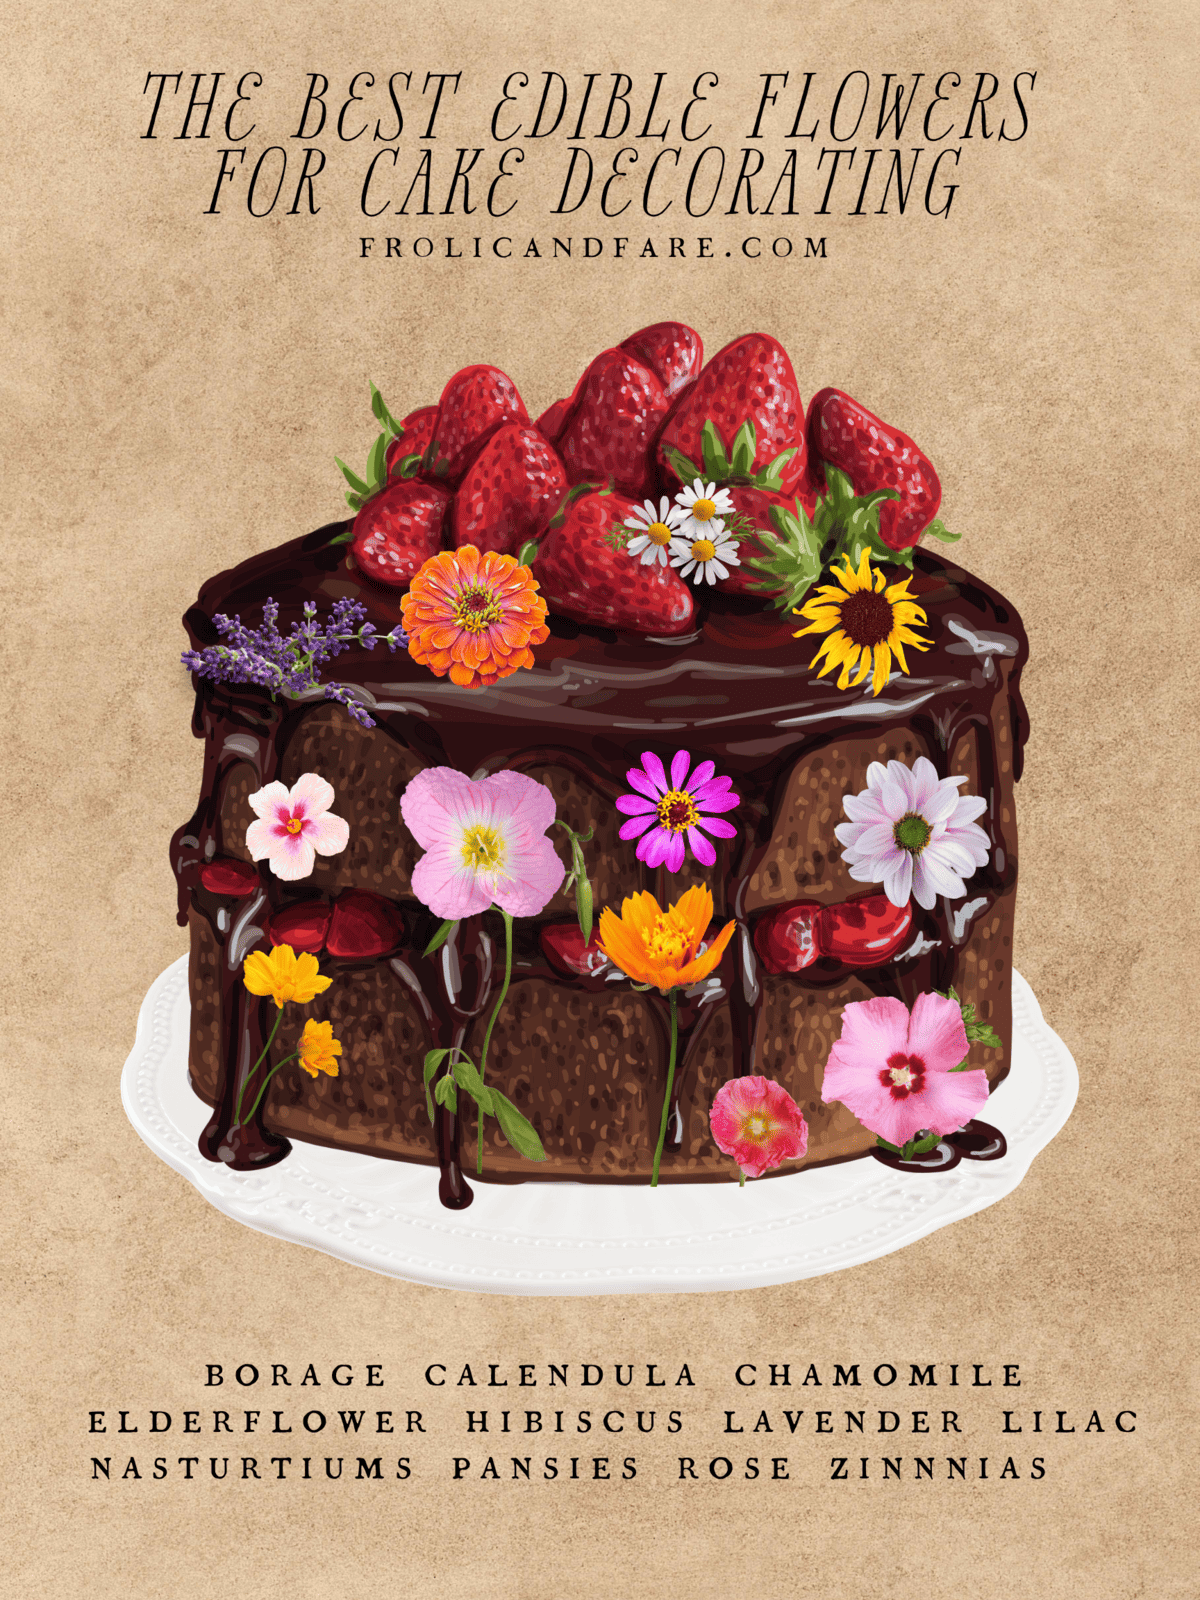 graphic with chocolate cake and edible flowers, the best edible flowers for cake